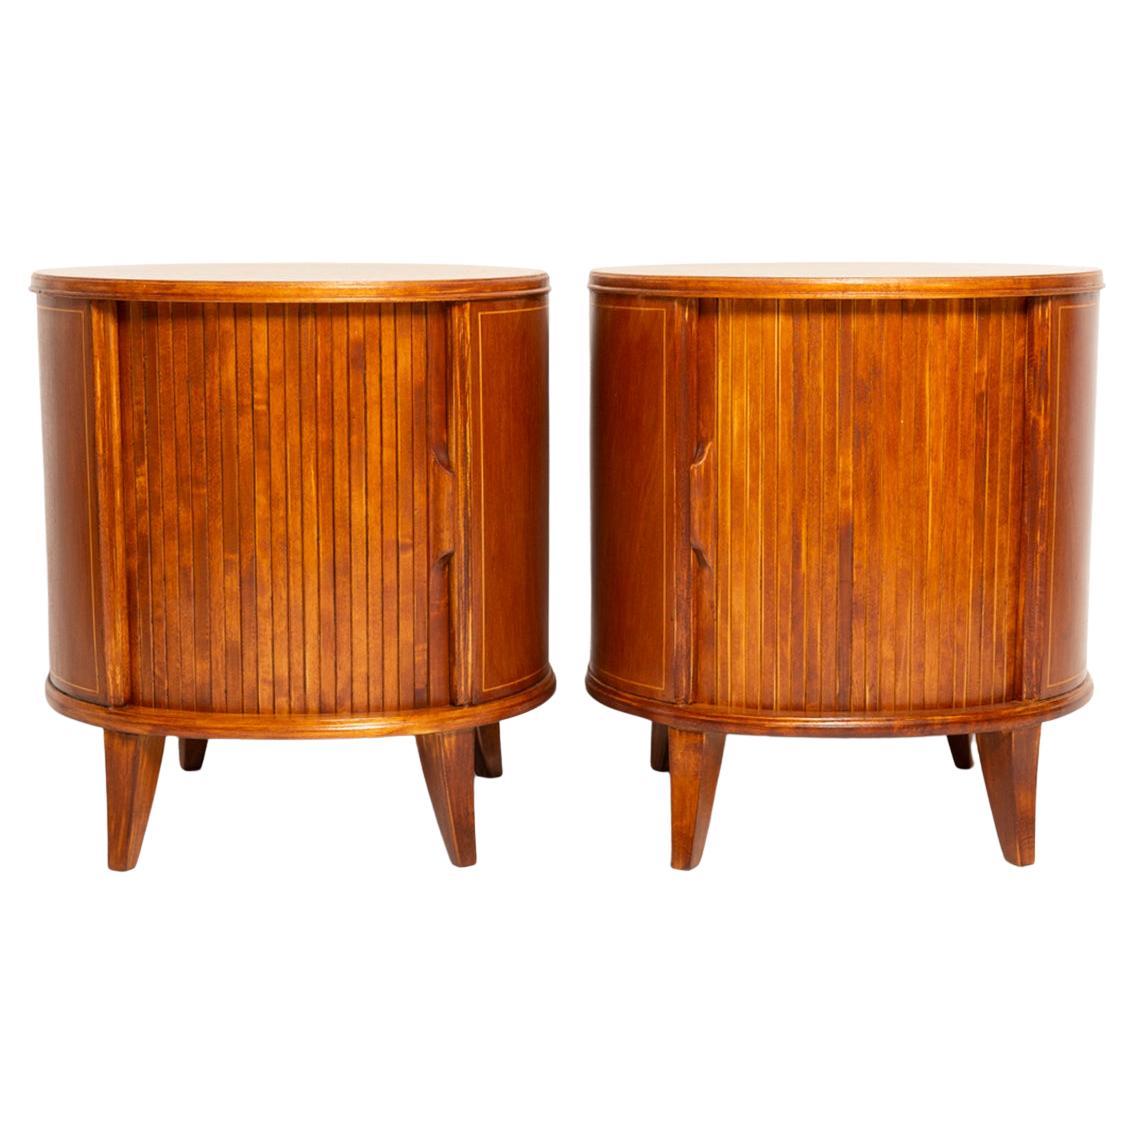 Set of Two Mid-Century Vintage Night Tables, Beech Wood, Europe, 1960s For Sale